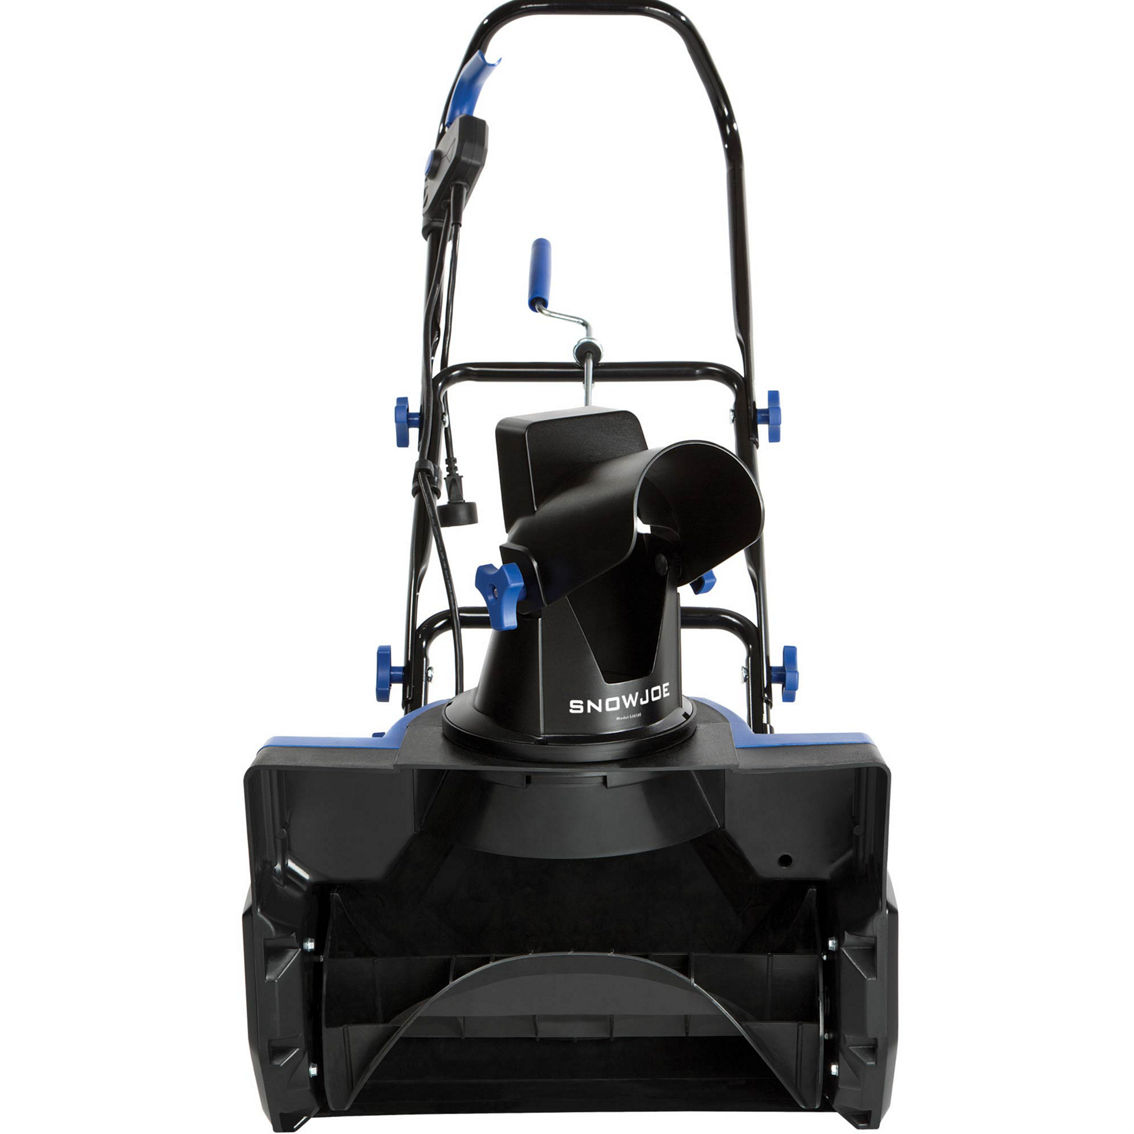 Snow Joe Ultra 18 in. 13 Amp Electric Snow Thrower - Image 2 of 4